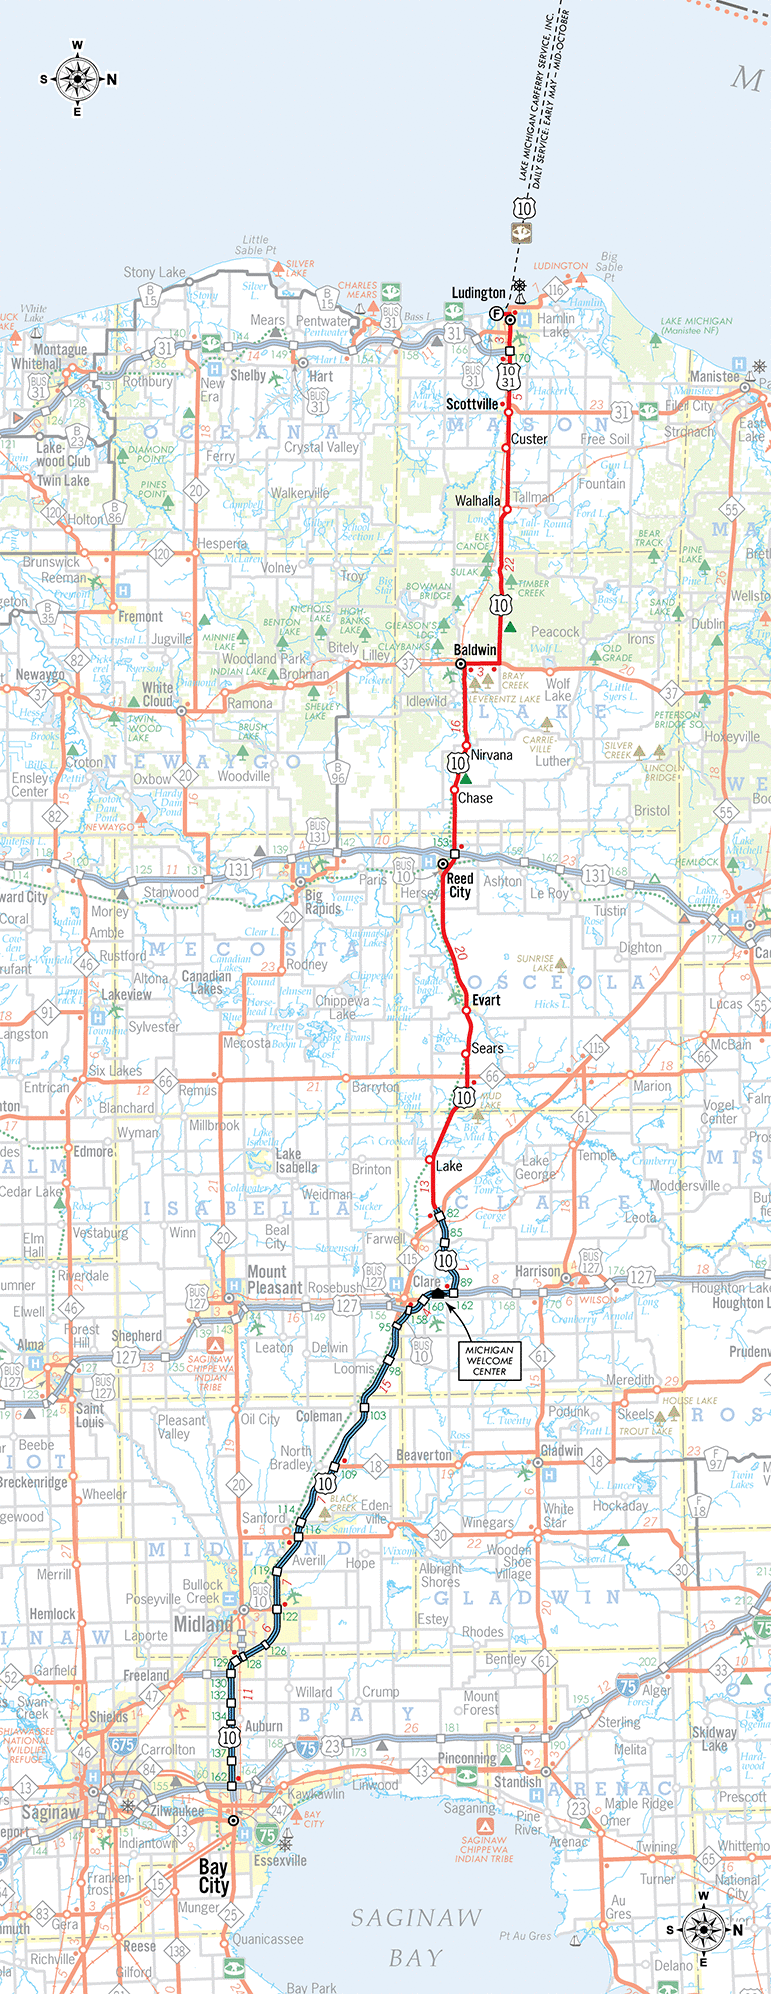 US-10 Route Map